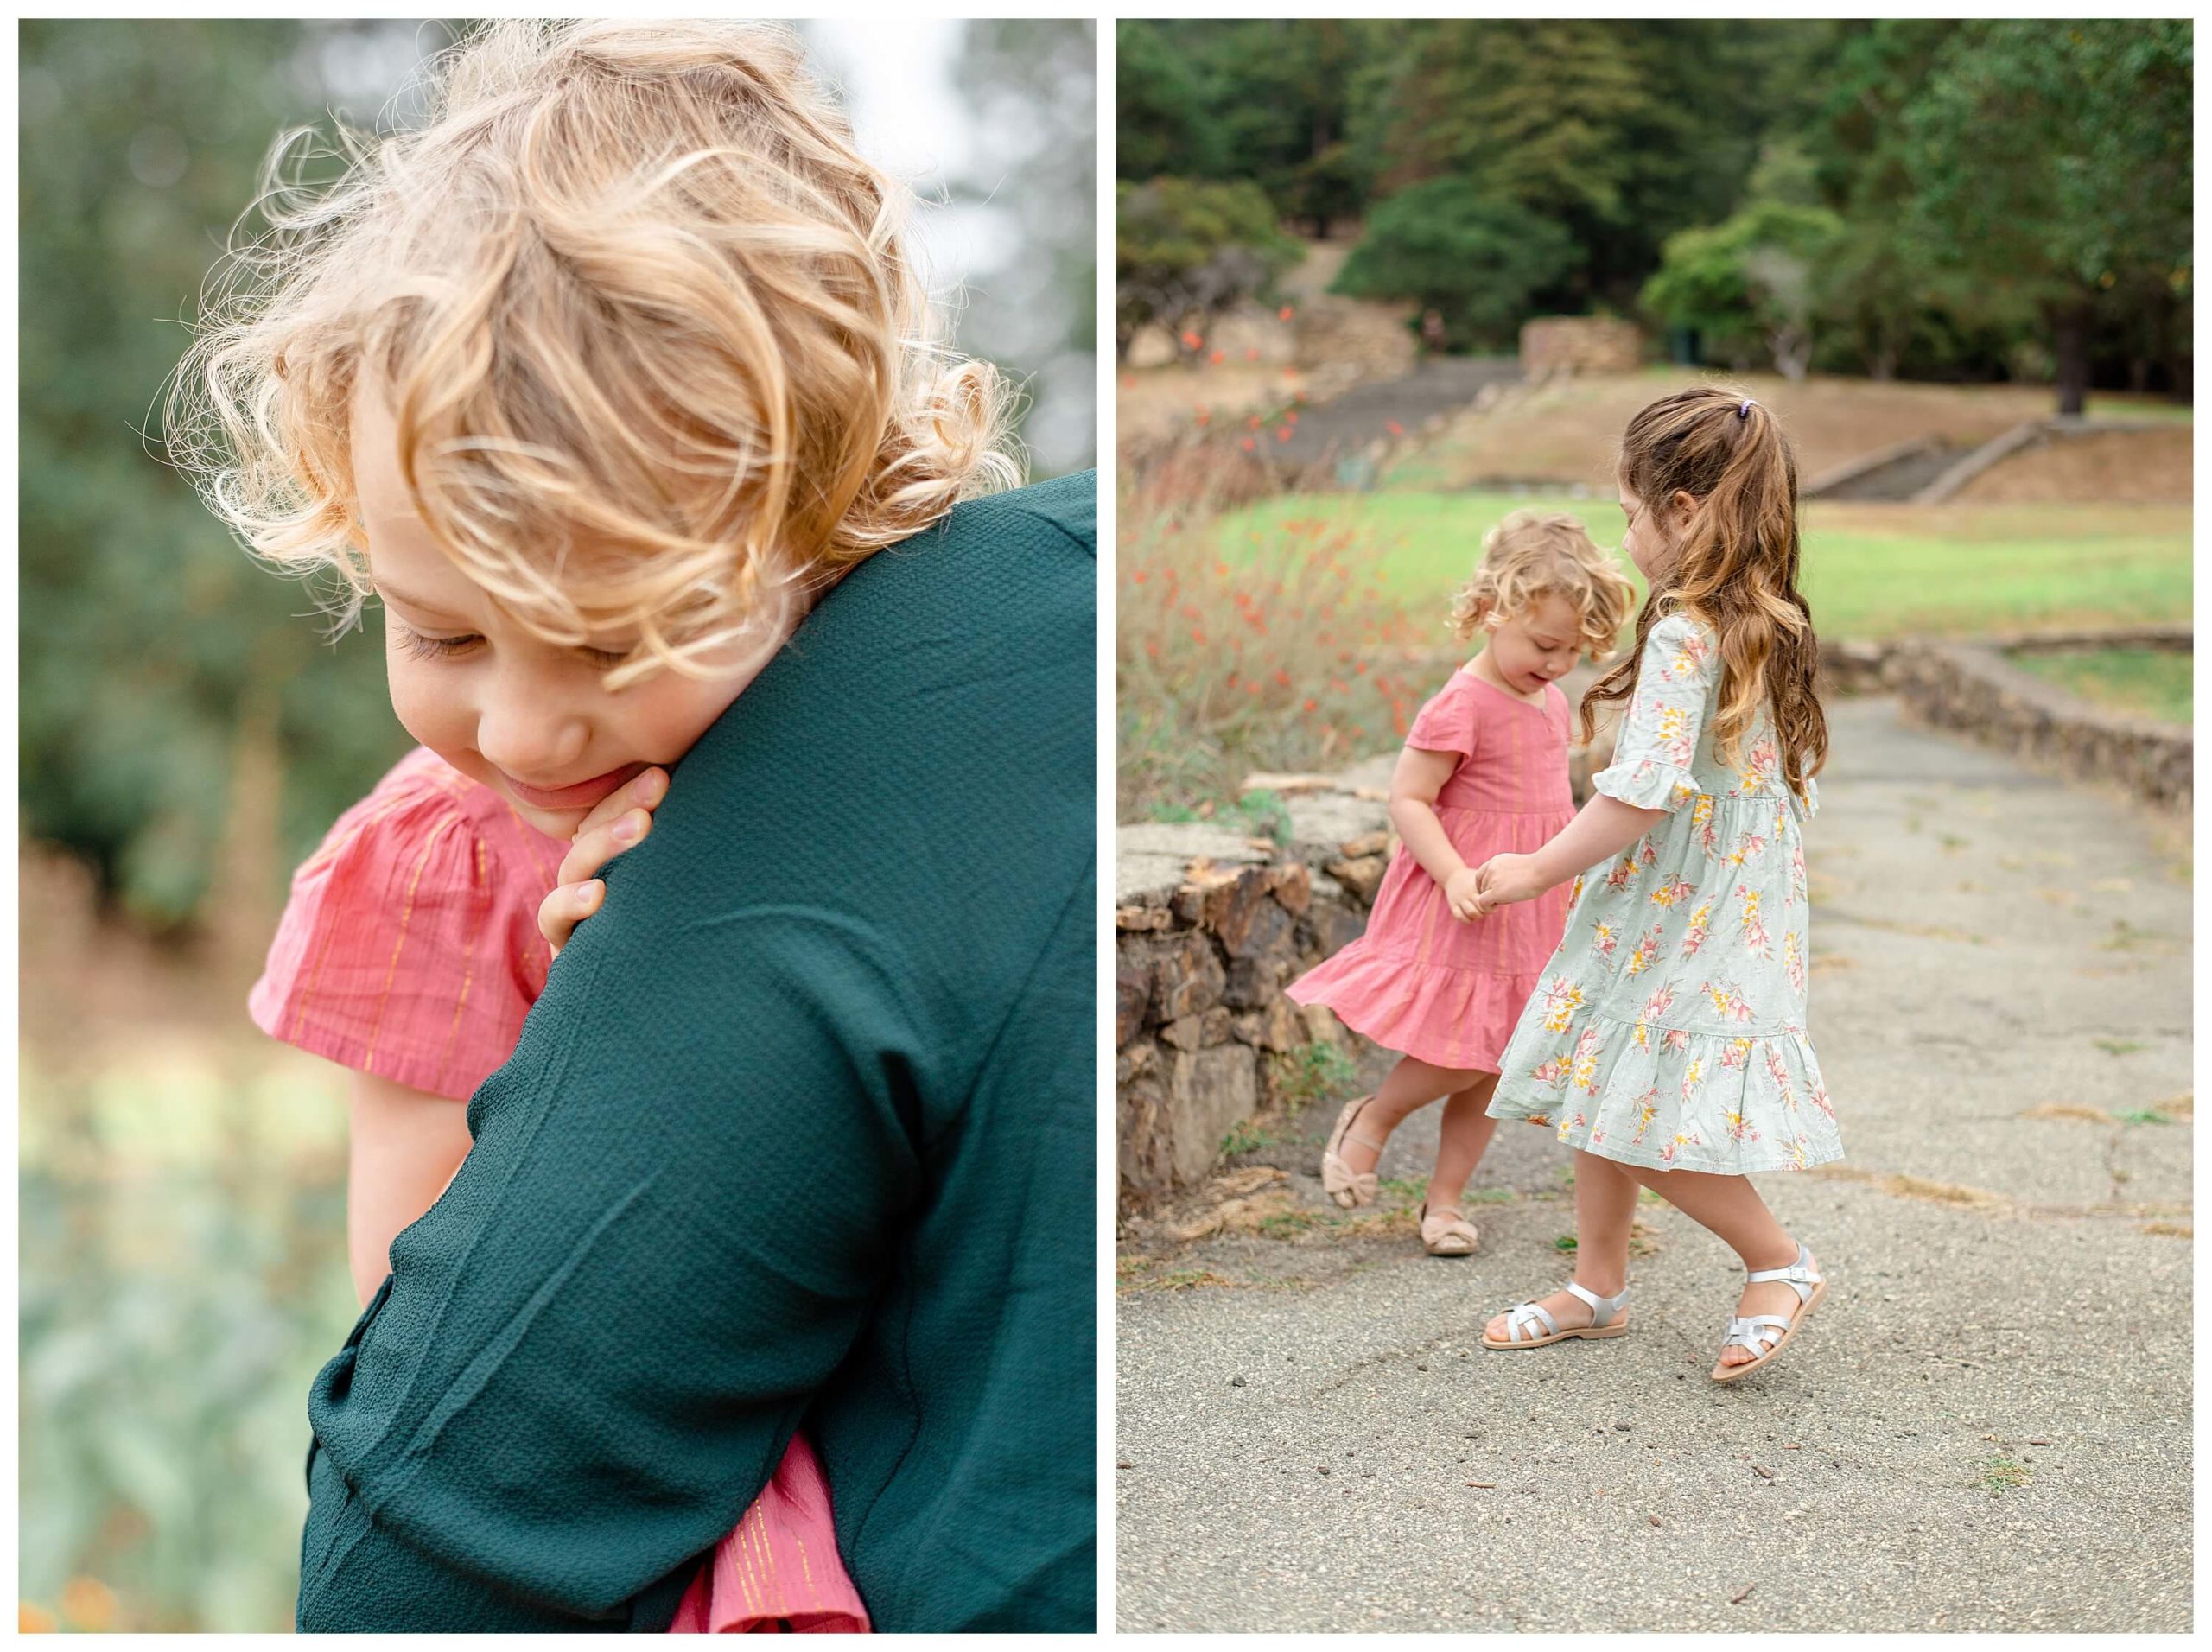 Left. A quiet moment as a toddler is held in her mother's arms after scraping her knee. Right: Two young sisters hold hands and dance in a park.